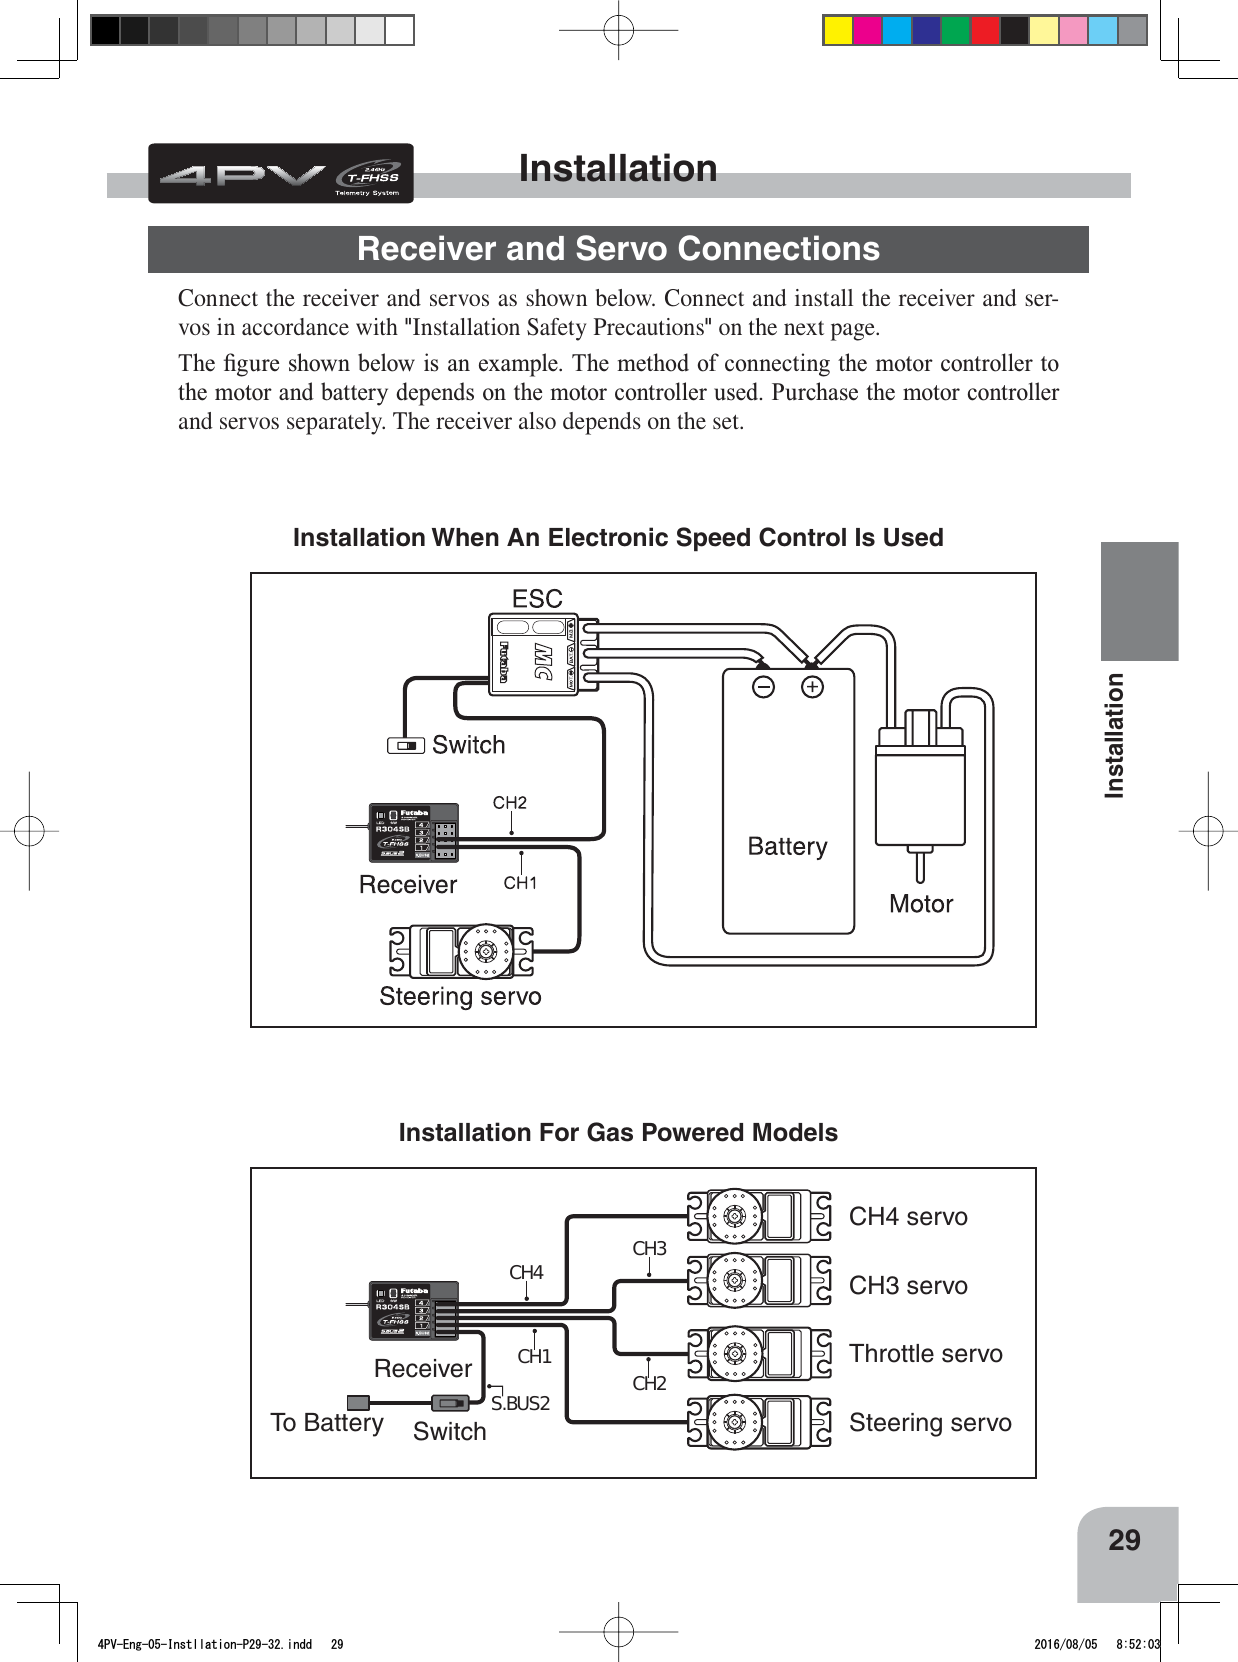 S.BUS2CH3CH2CH1CH4ReceiverSwitchTo BatteryCH4 servoCH3 servoThrottle servoSteering servo29InstallationConnect the receiver and servos as shown below. Connect and install the receiver and ser-vos in accordance with &quot;Installation Safety Precautions&quot; on the next page.7KH¿JXUHVKRZQEHORZLVDQH[DPSOH7KHPHWKRGRIFRQQHFWLQJWKHPRWRUFRQWUROOHUWRWKHPRWRUDQGEDWWHU\GHSHQGVRQWKHPRWRUFRQWUROOHUXVHG3XUFKDVHWKHPRWRUFRQWUROOHUand servos separately. The receiver also depends on the set.Installation When An Electronic Speed Control Is Used Installation For Gas Powered Models InstallationReceiver and Servo Connections4PV-Eng-05-Instllation-P29-32.indd   29 2016/08/05   8:52:03